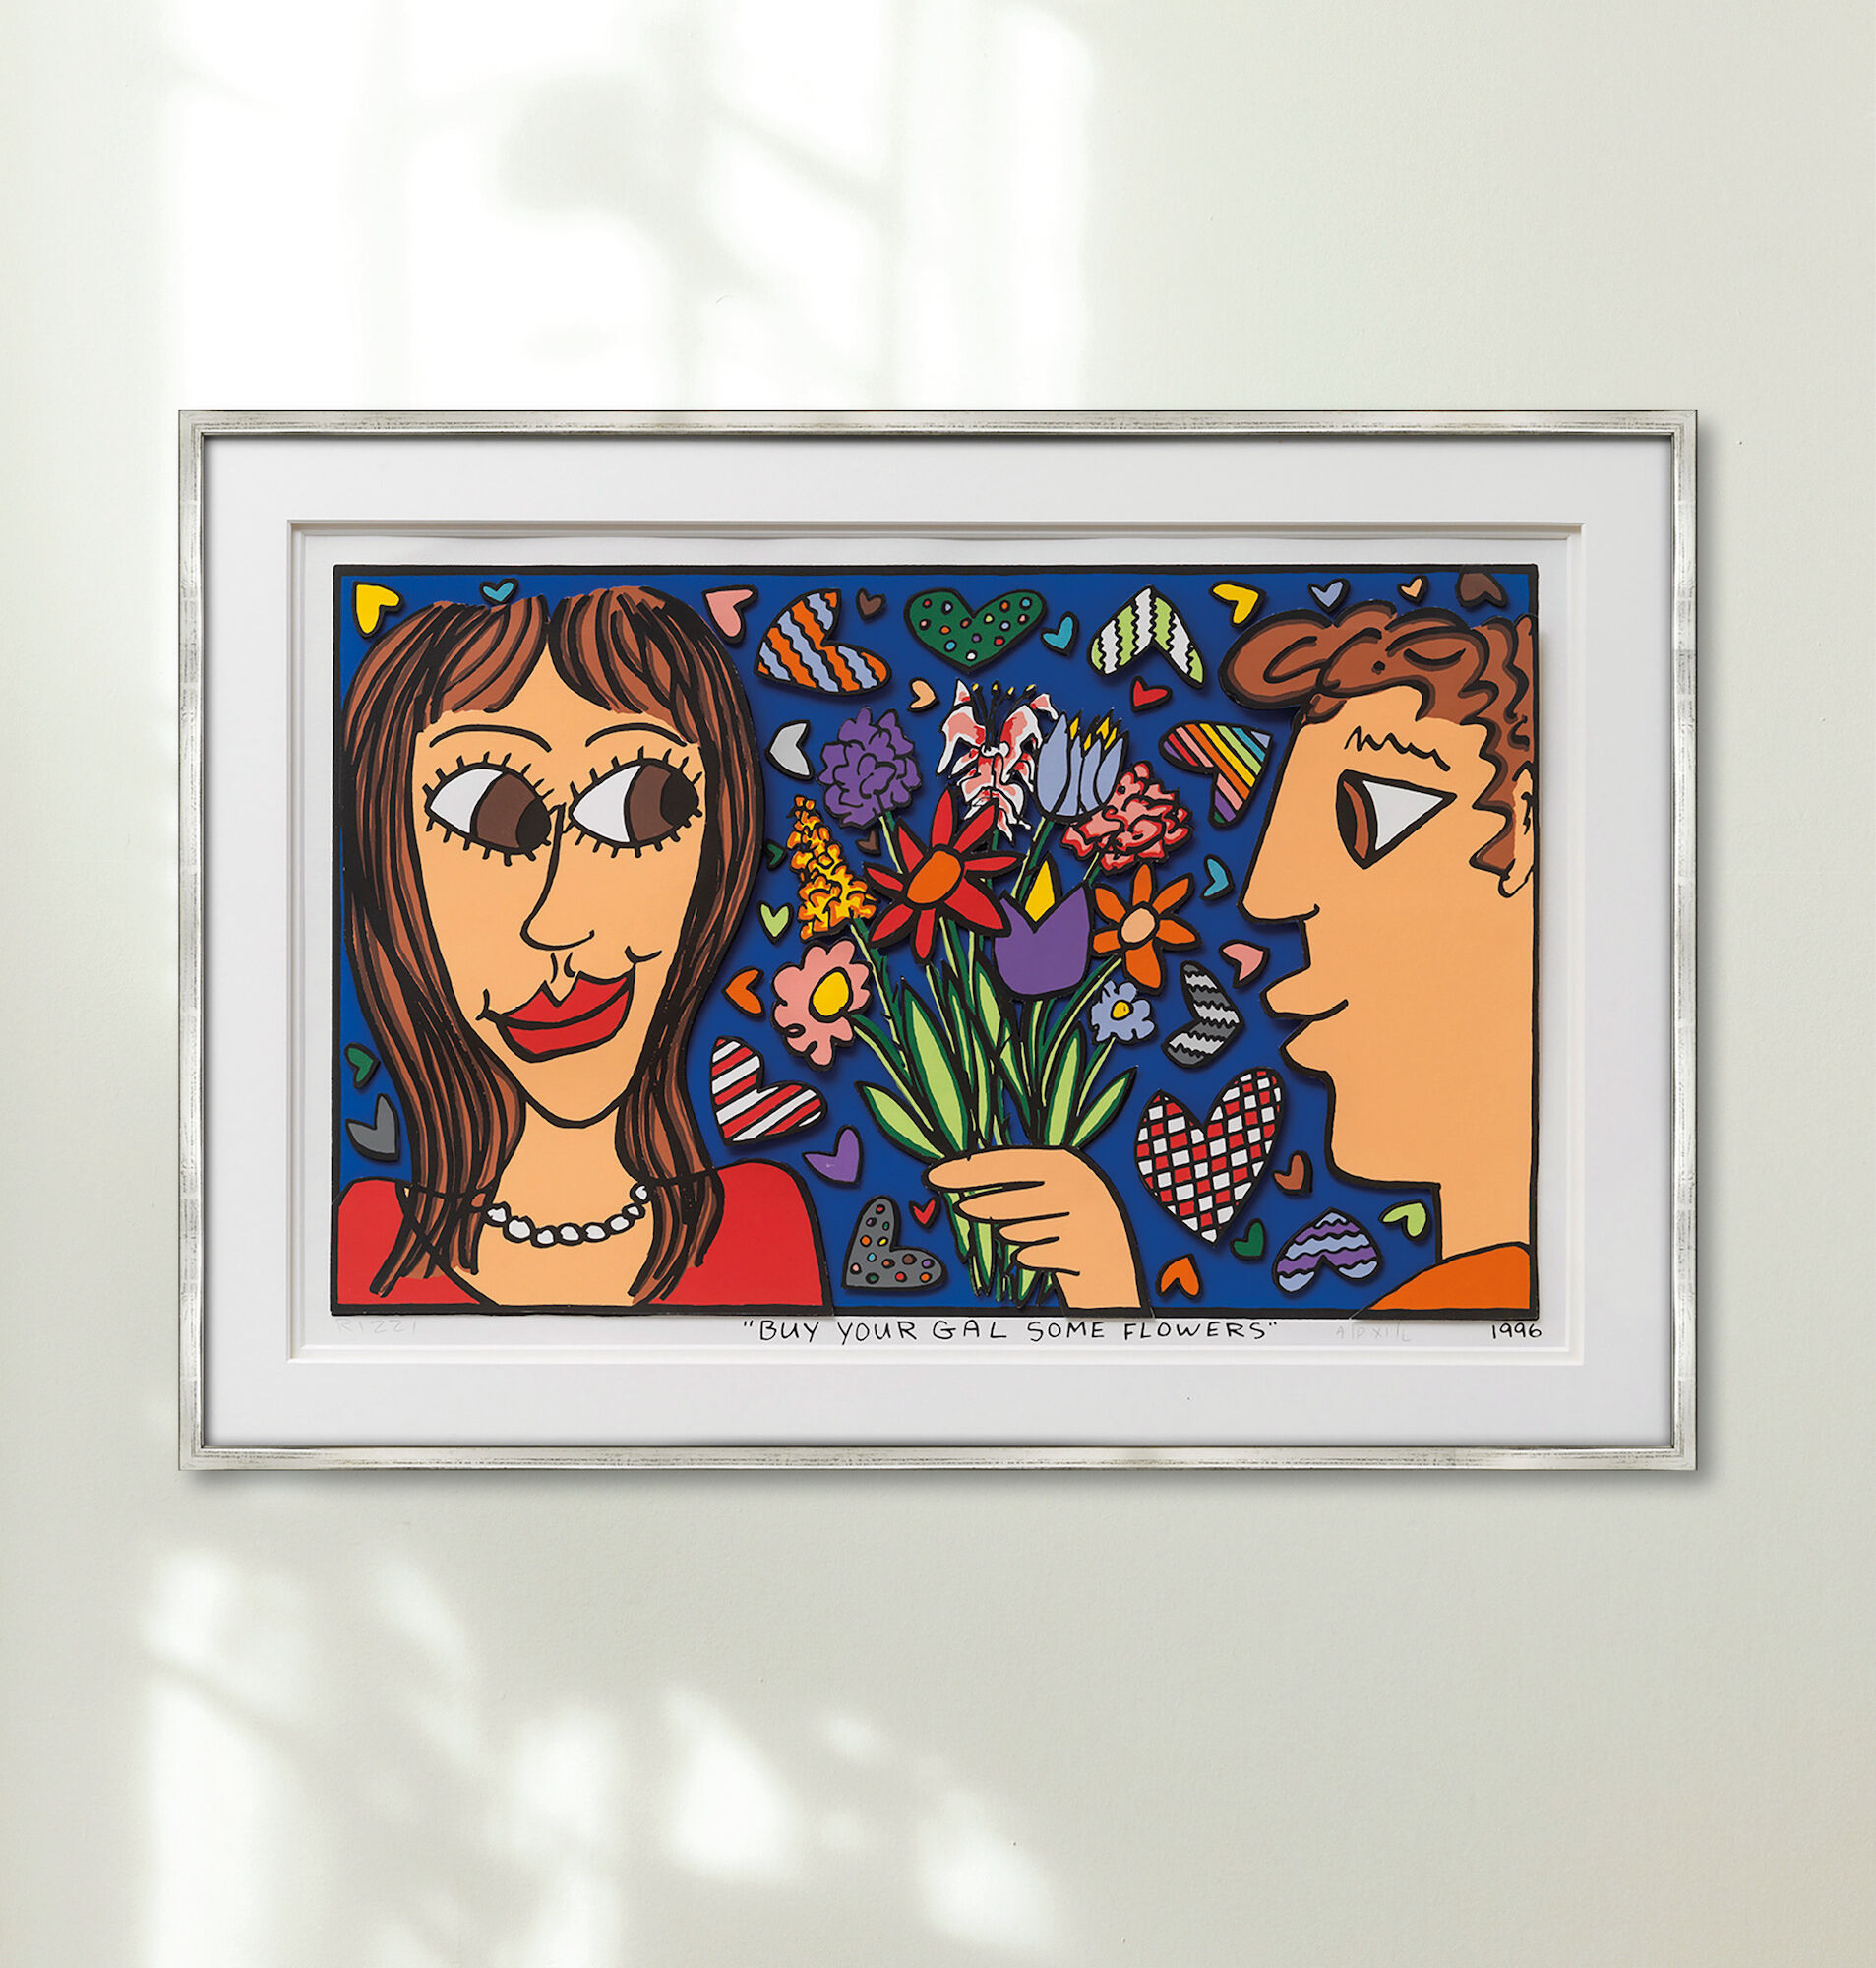 Tableau "Buy your Gal some Flowers" (1996) von James Rizzi